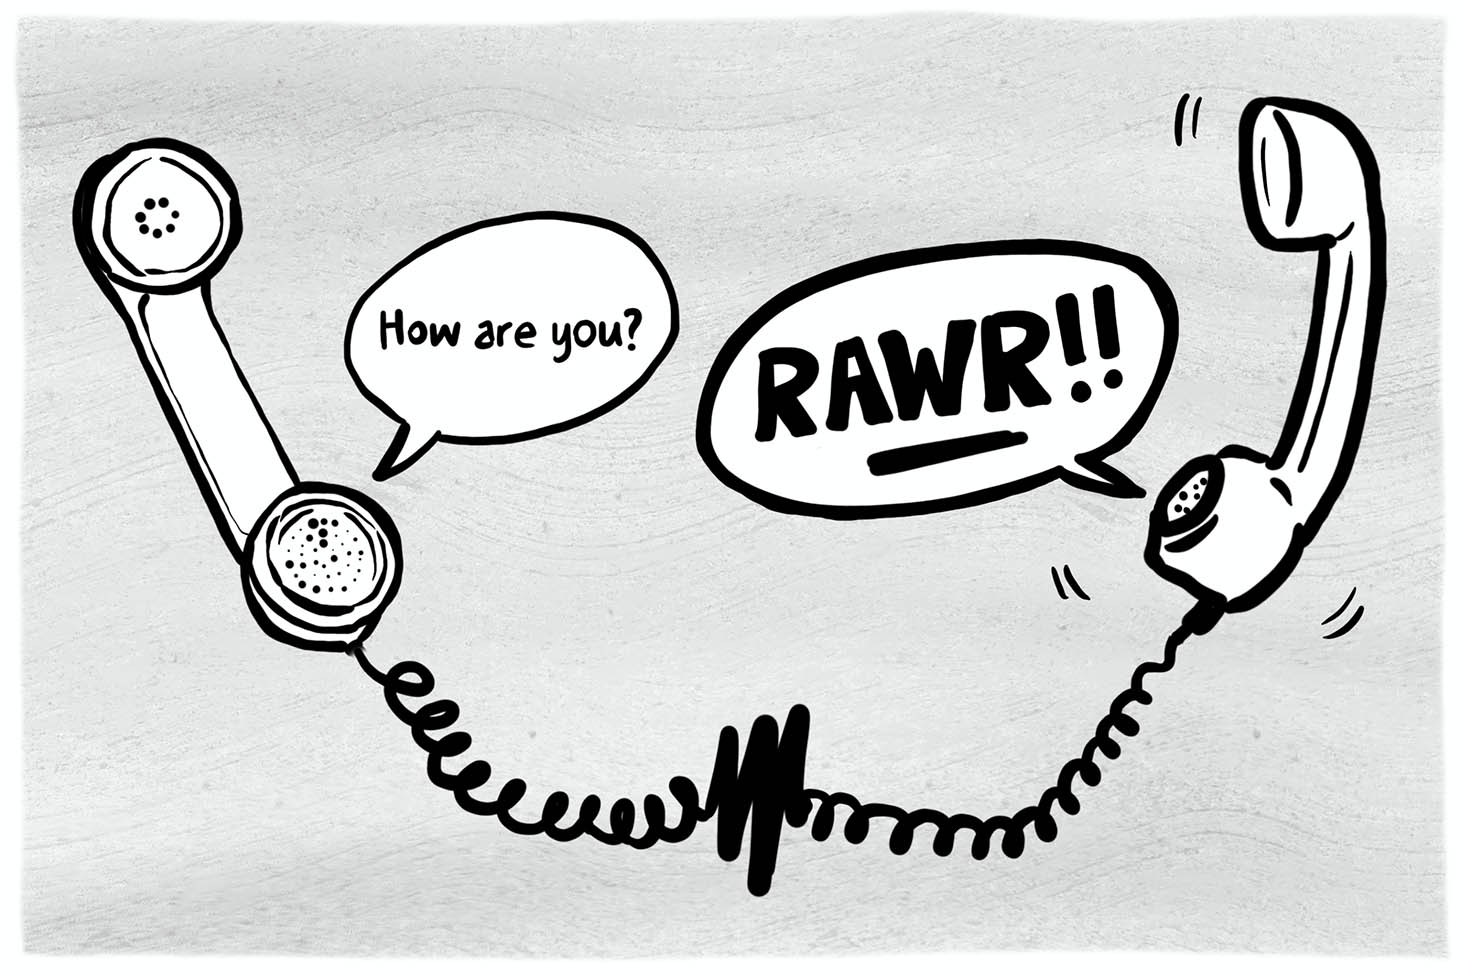 Illustration of two telephones with a squiggle in the cord. A chat bubble over one phone says "How are you" and the other says "RAWR!"